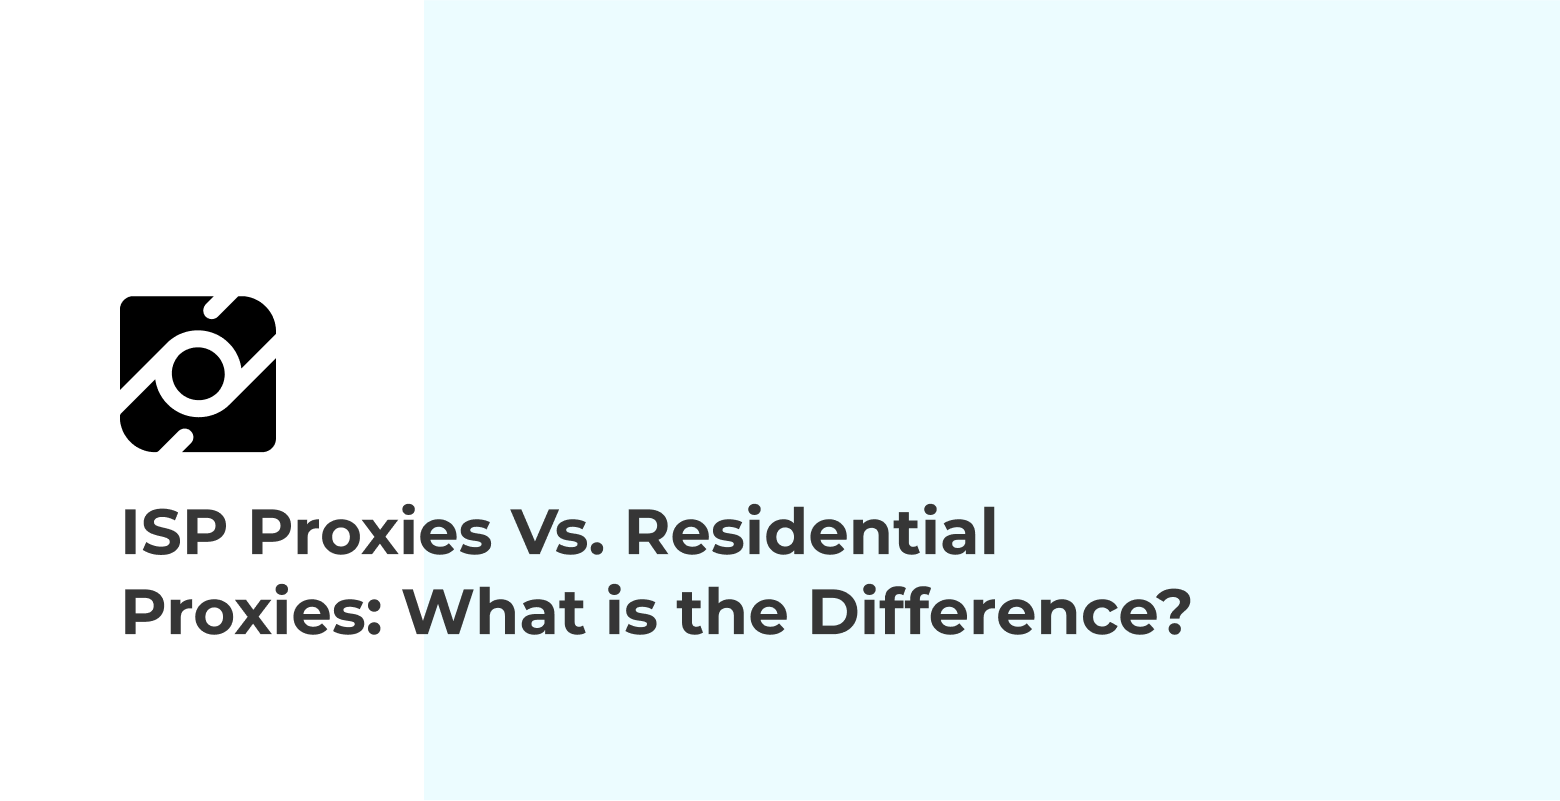 ISP Proxies Vs. Residential Proxies: What is the Difference?